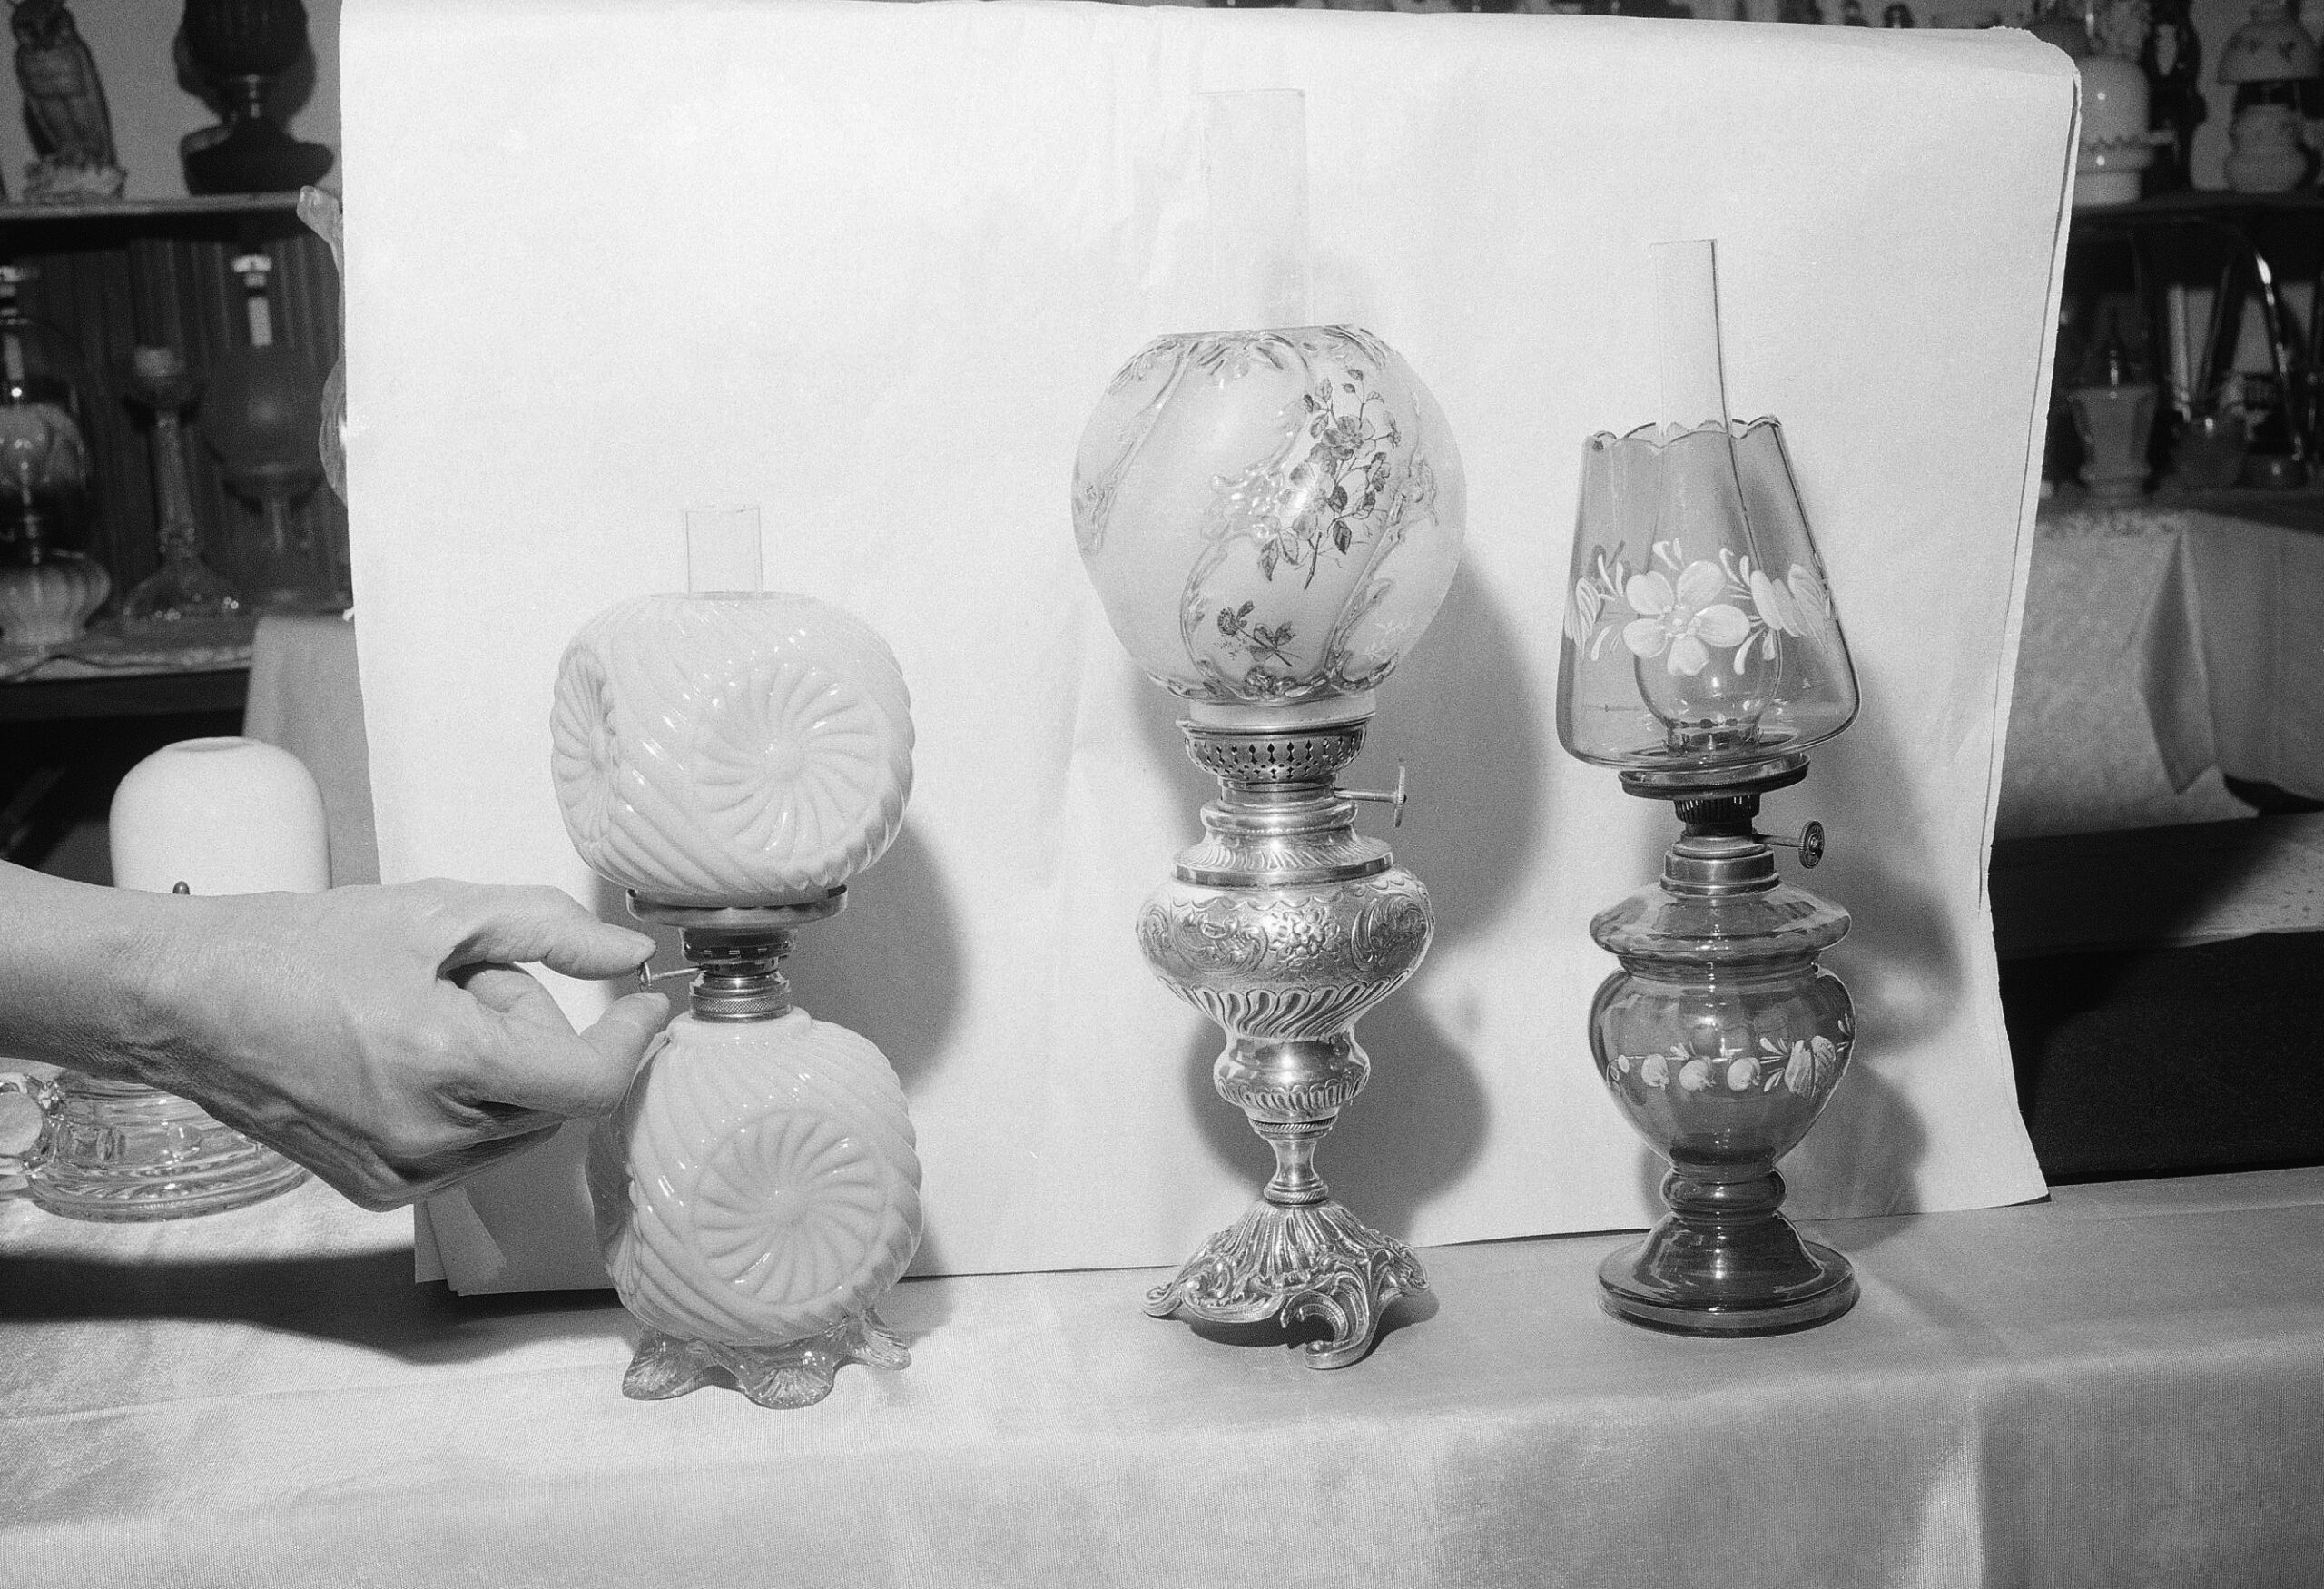 Three lamps sit in a cloth-covered table. A hand reaches out to touch one. The photo is black and white.